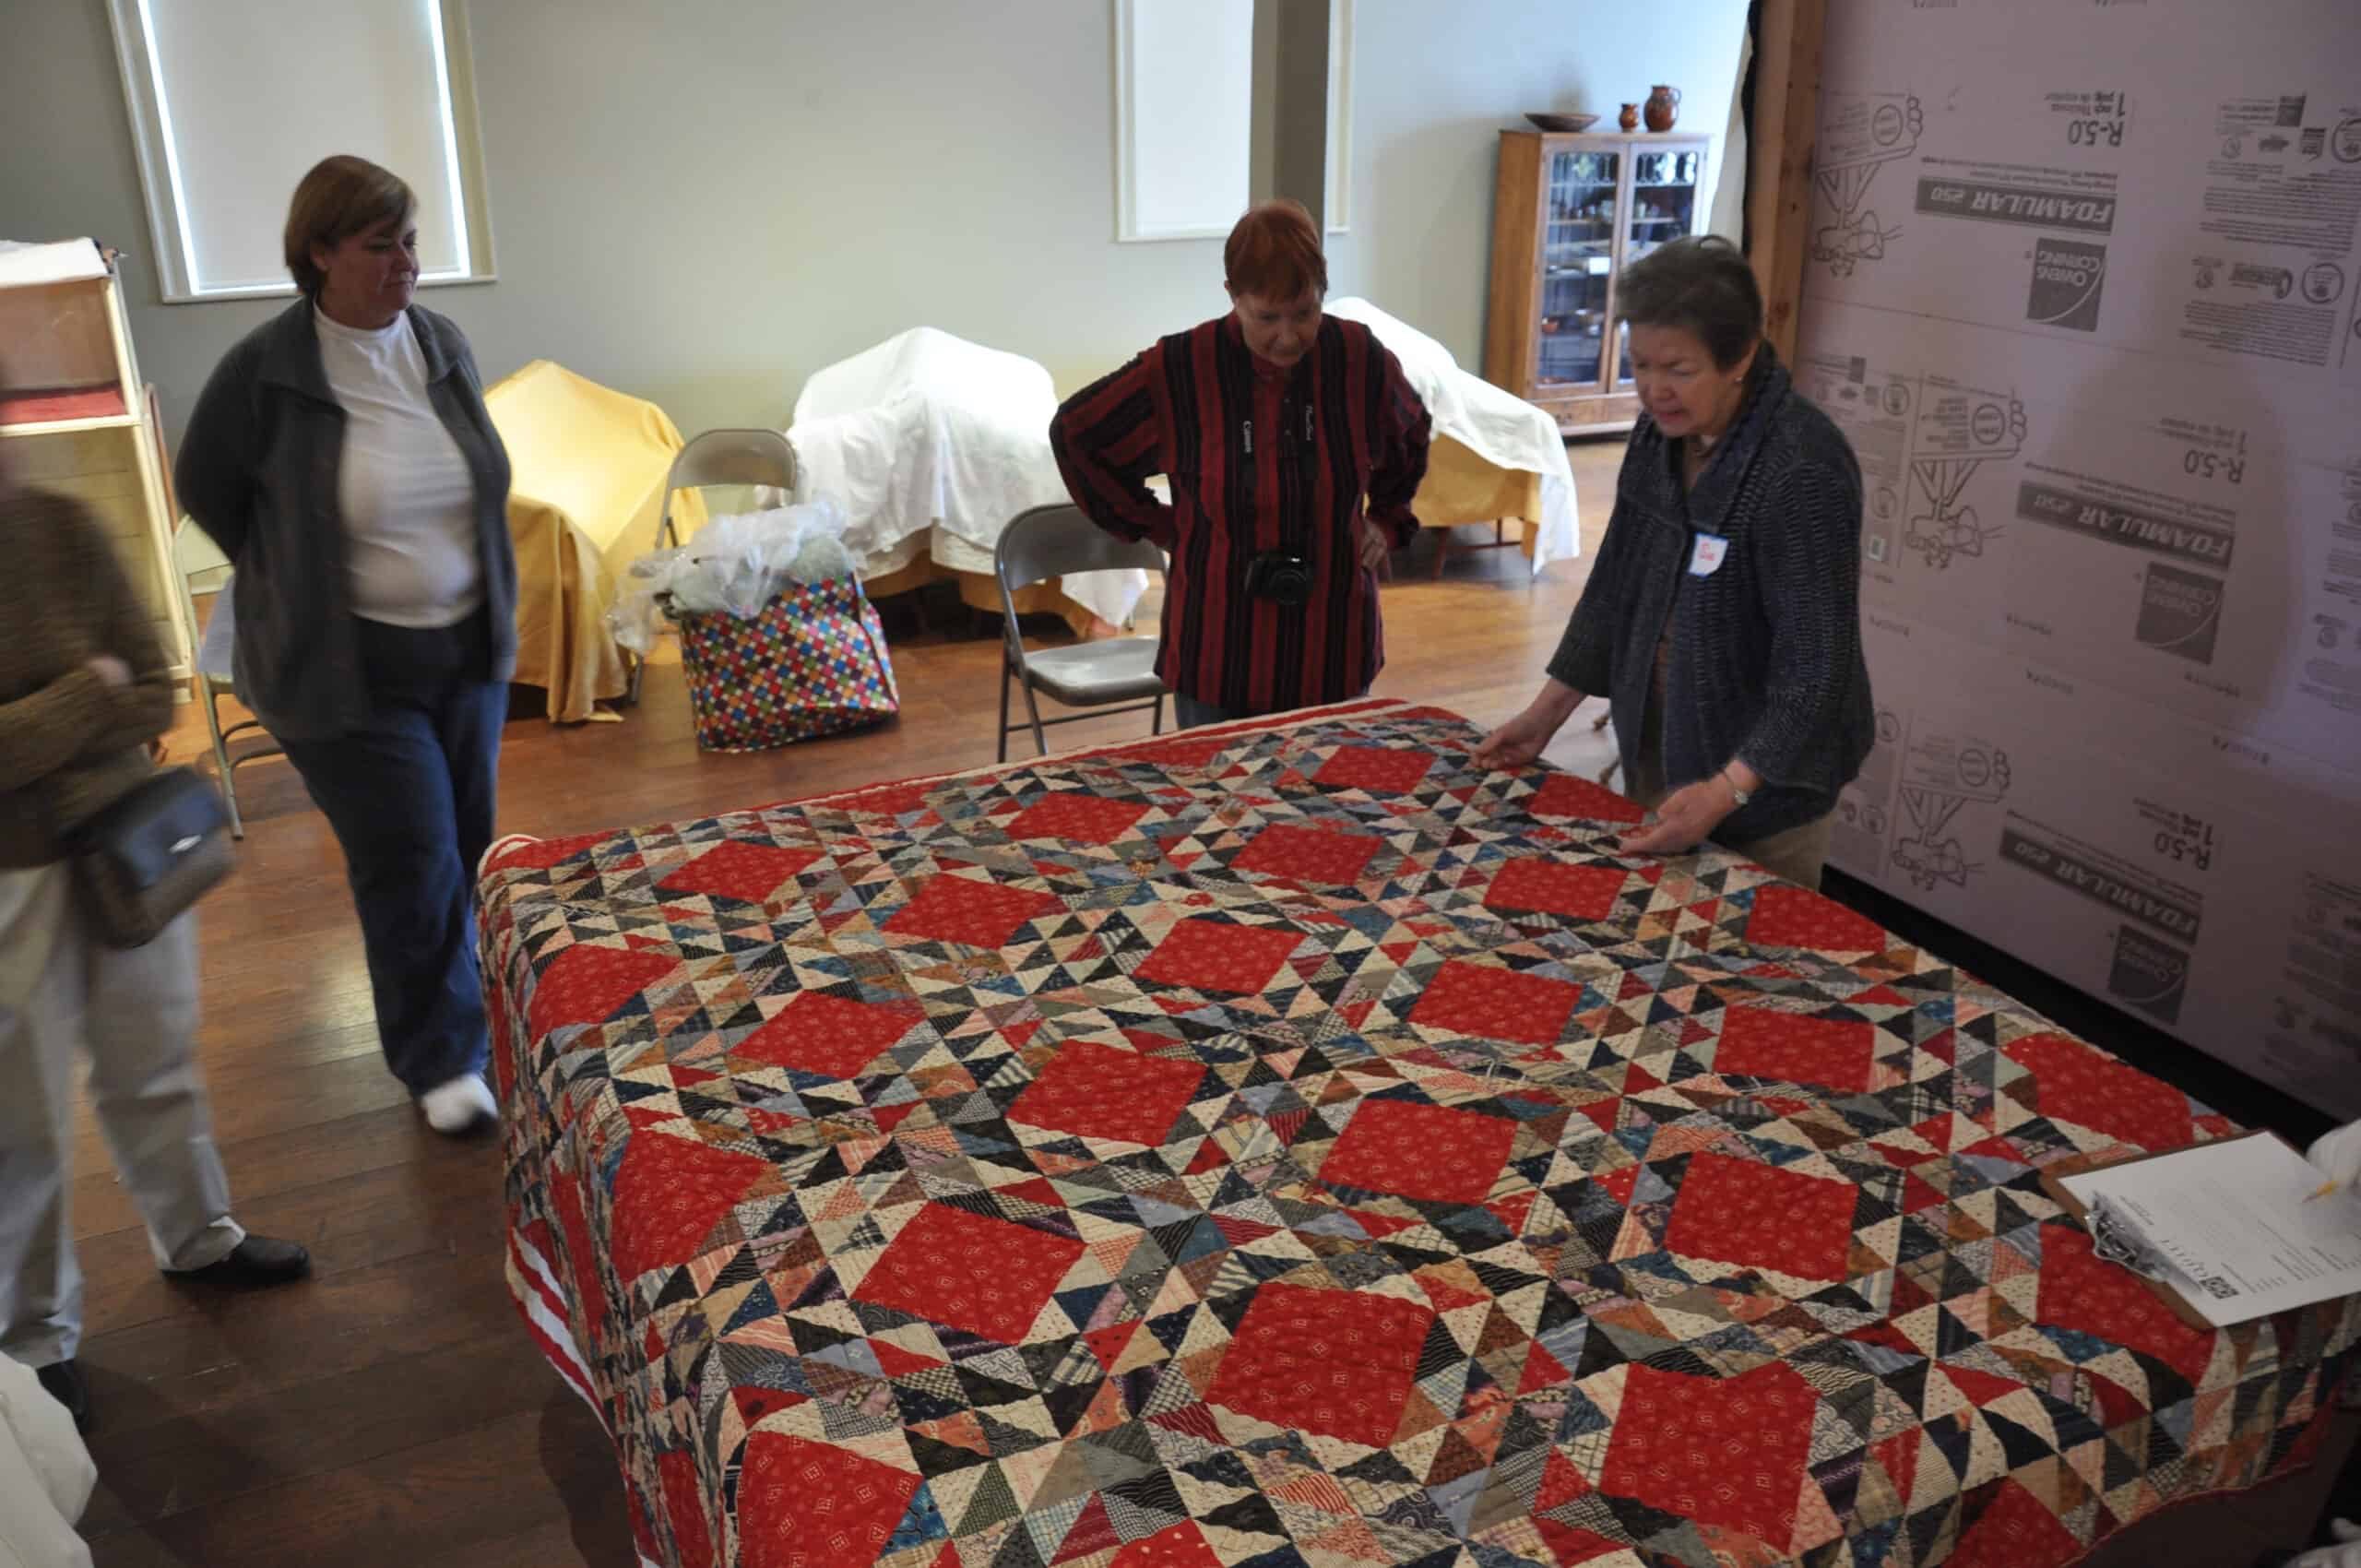 Quilt historian and lecturer Sue Reich from Washington Depot examines a quilt brought to the Norwalk Historical Society during Quilt Discovery Day in April 2011.